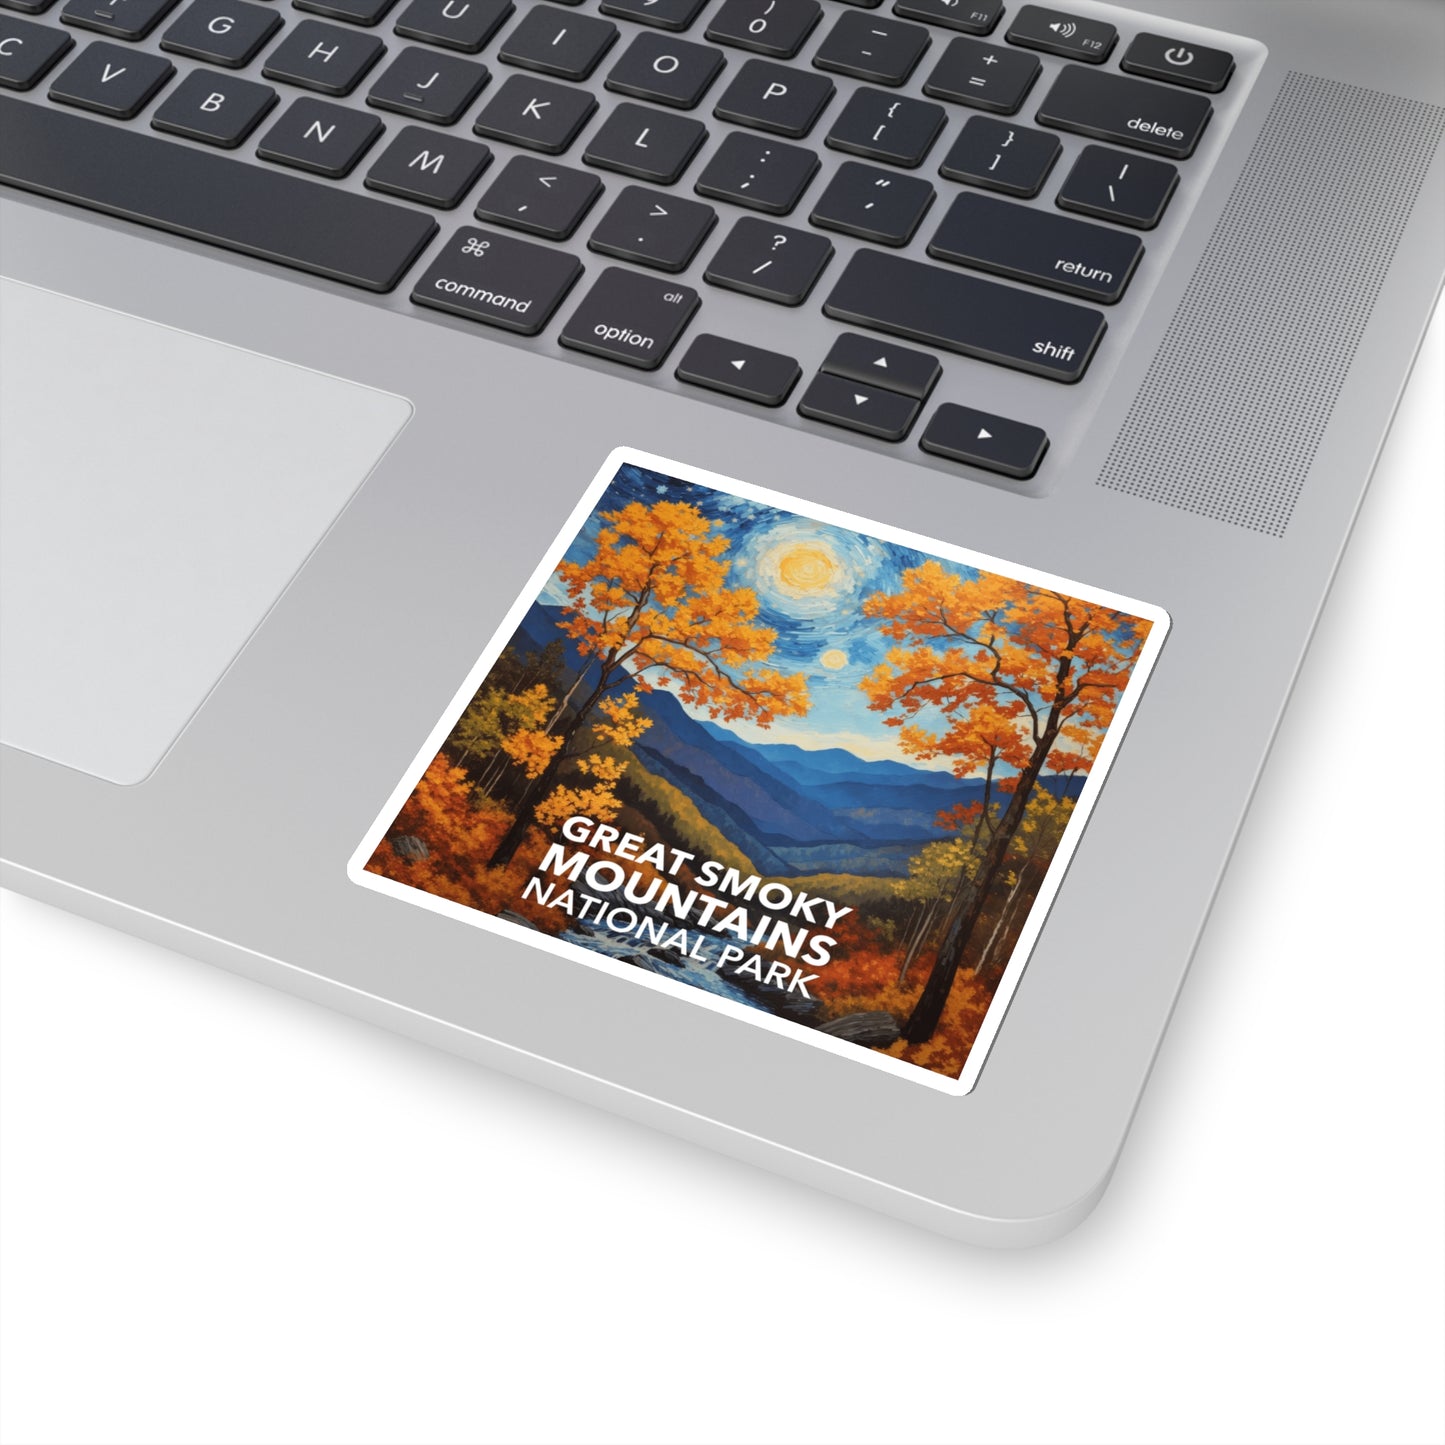 Great Smoky Mountains National Park Sticker - The Starry Night